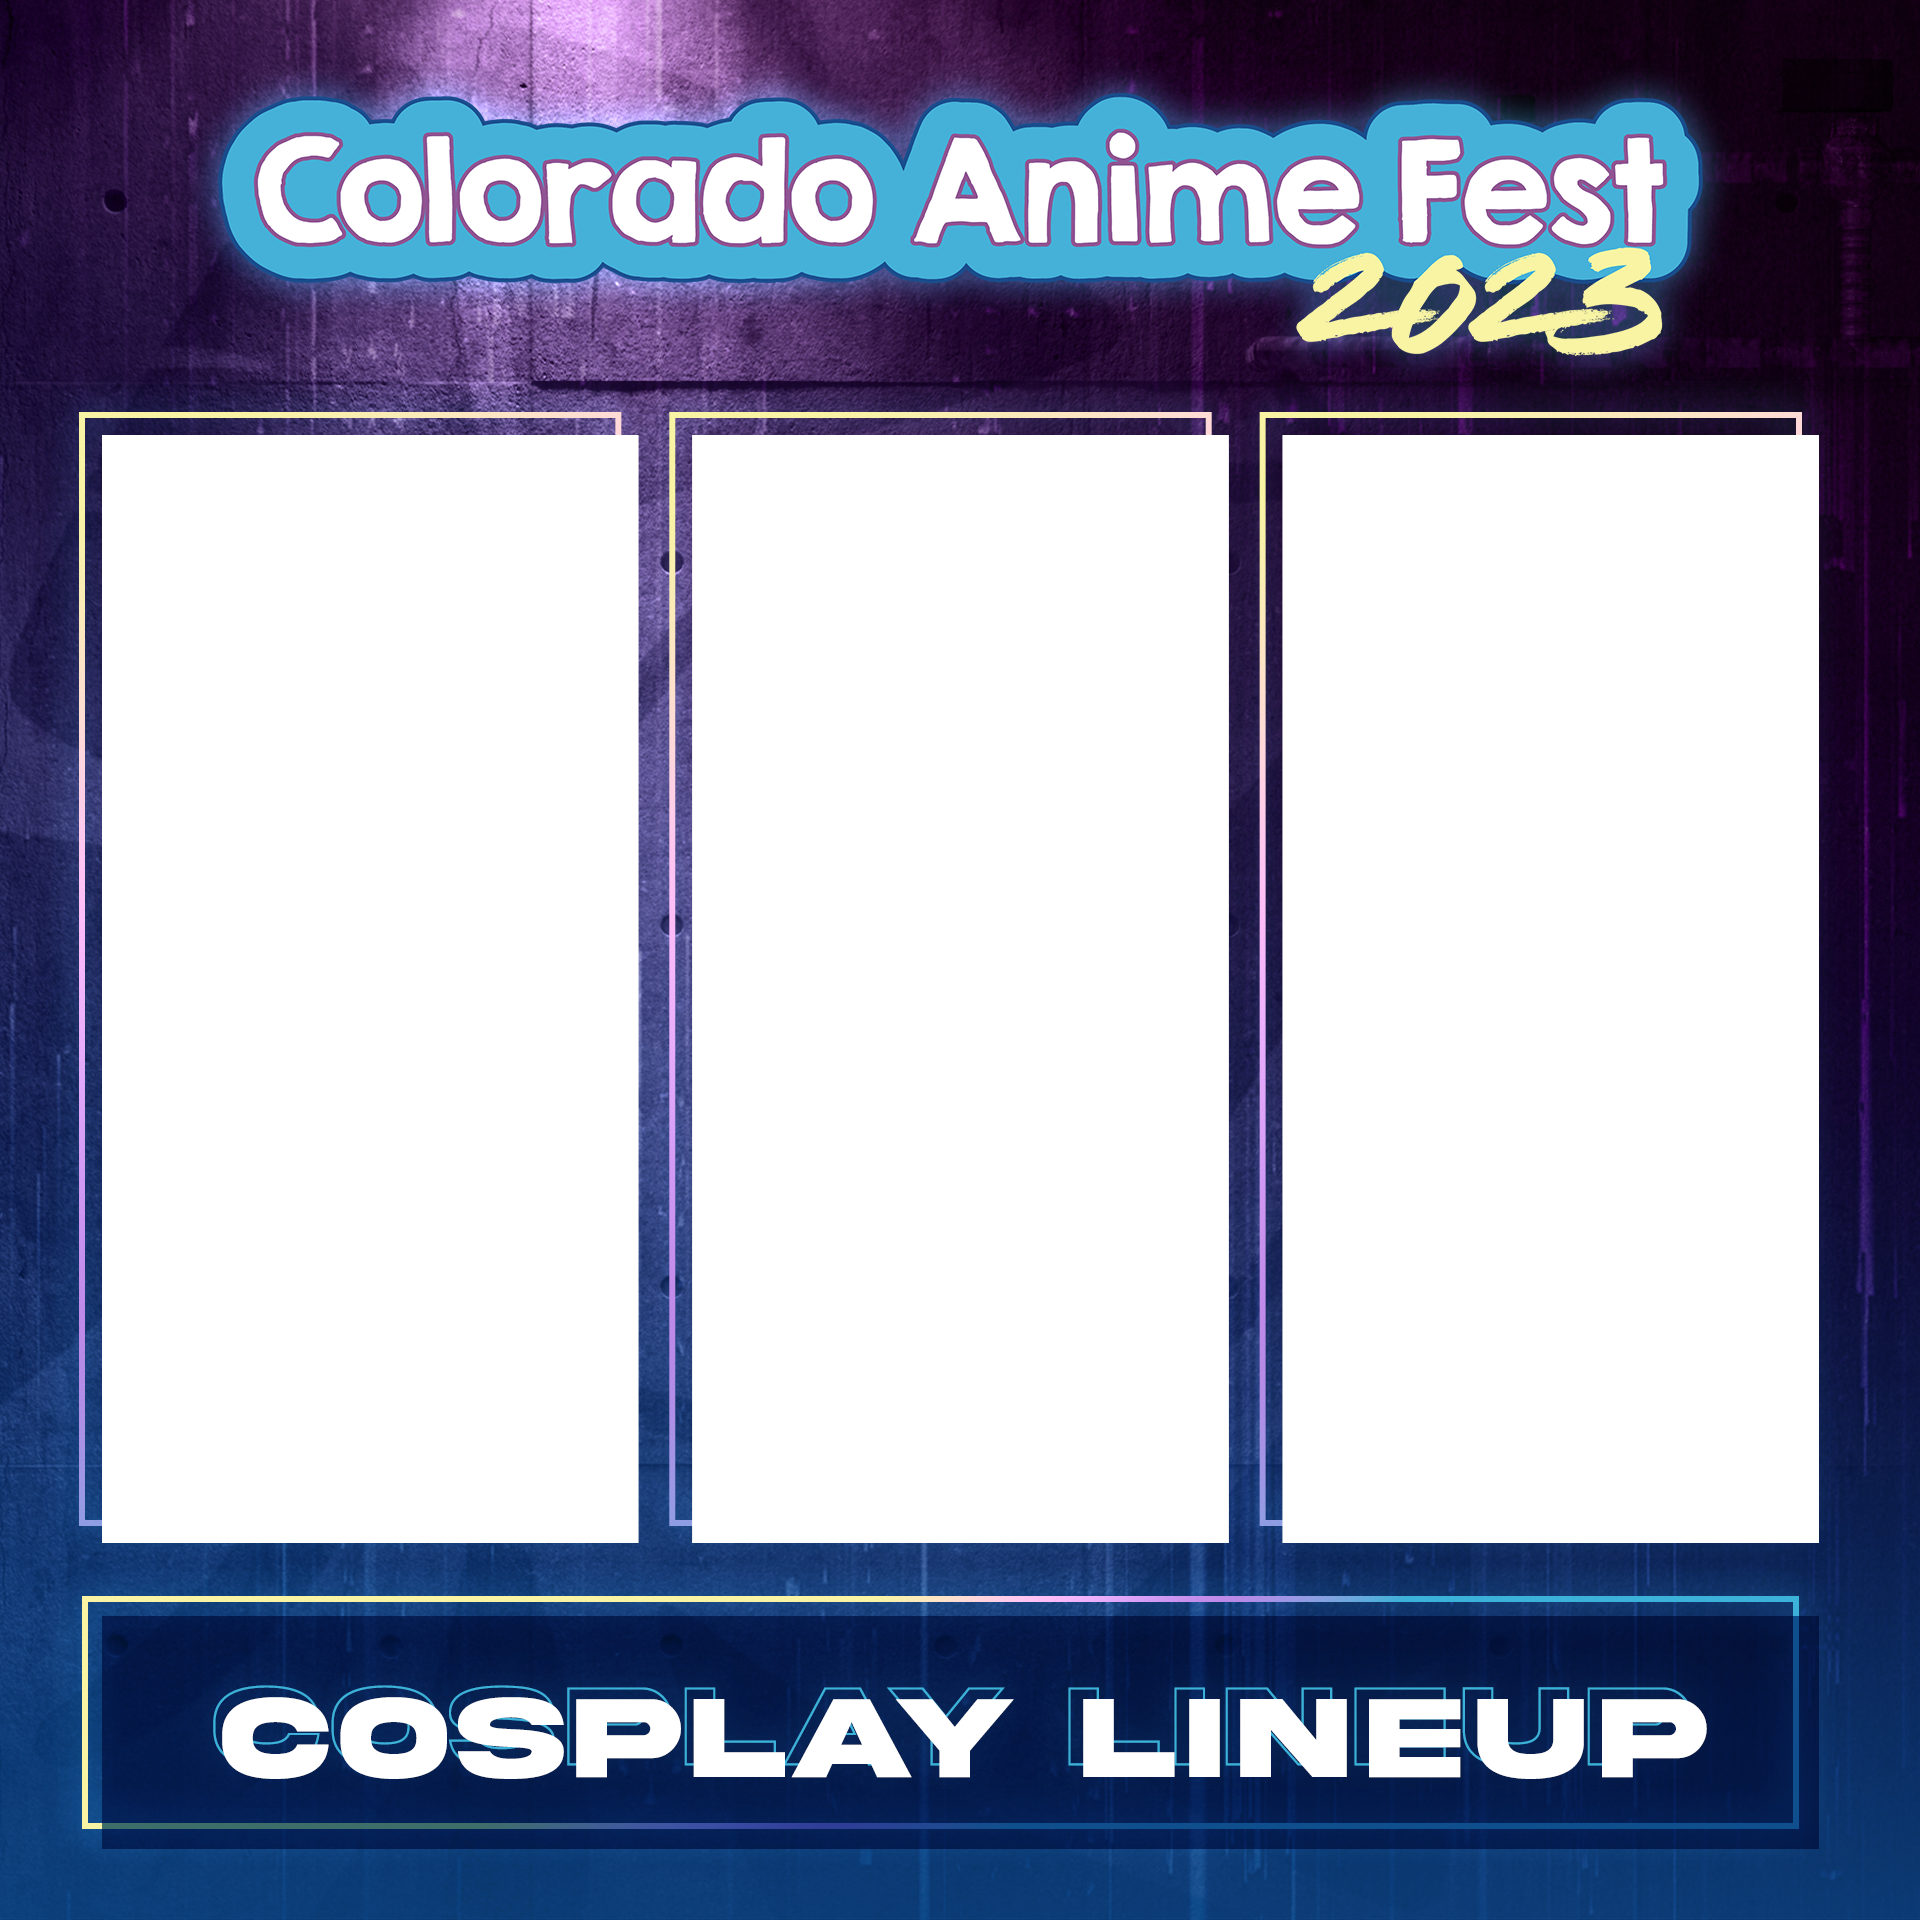 COAF_2023_Cosplay_Lineup_3BOX.png